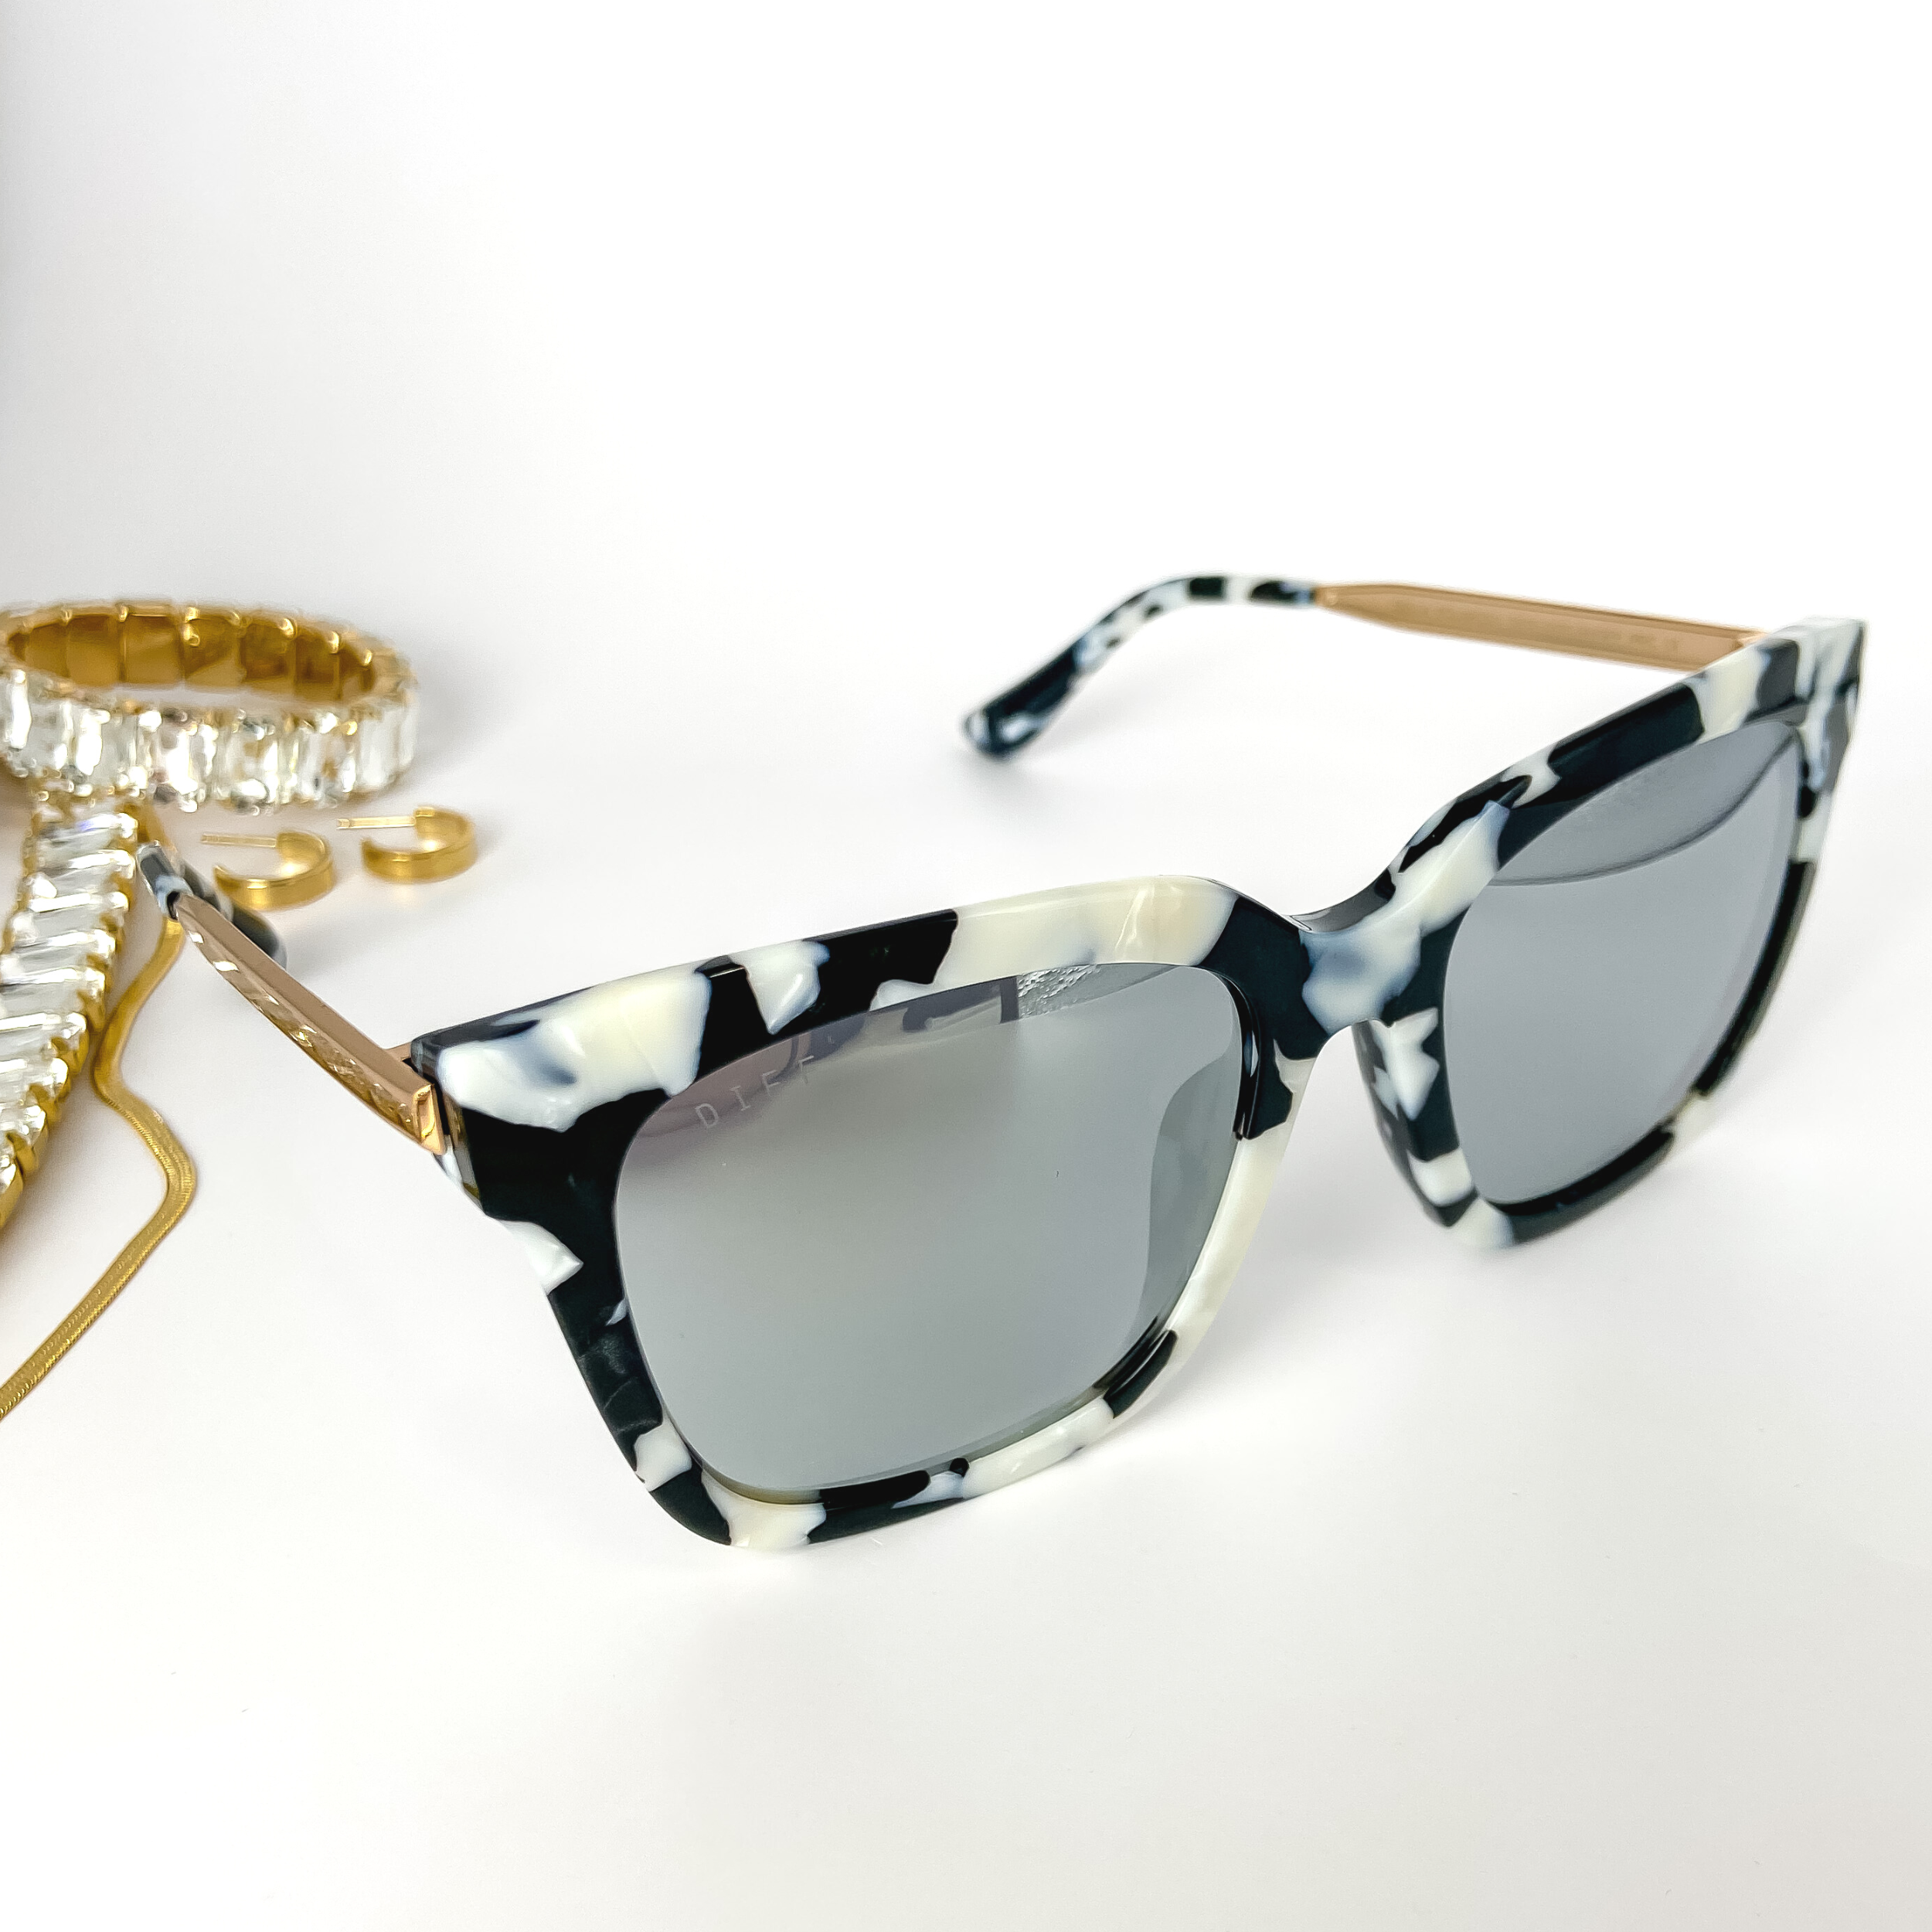 A pair of black and white print sunglasses with grey lenses and gold-tone trim. These sunglasses are pictured open on a white background with gold jewelry.